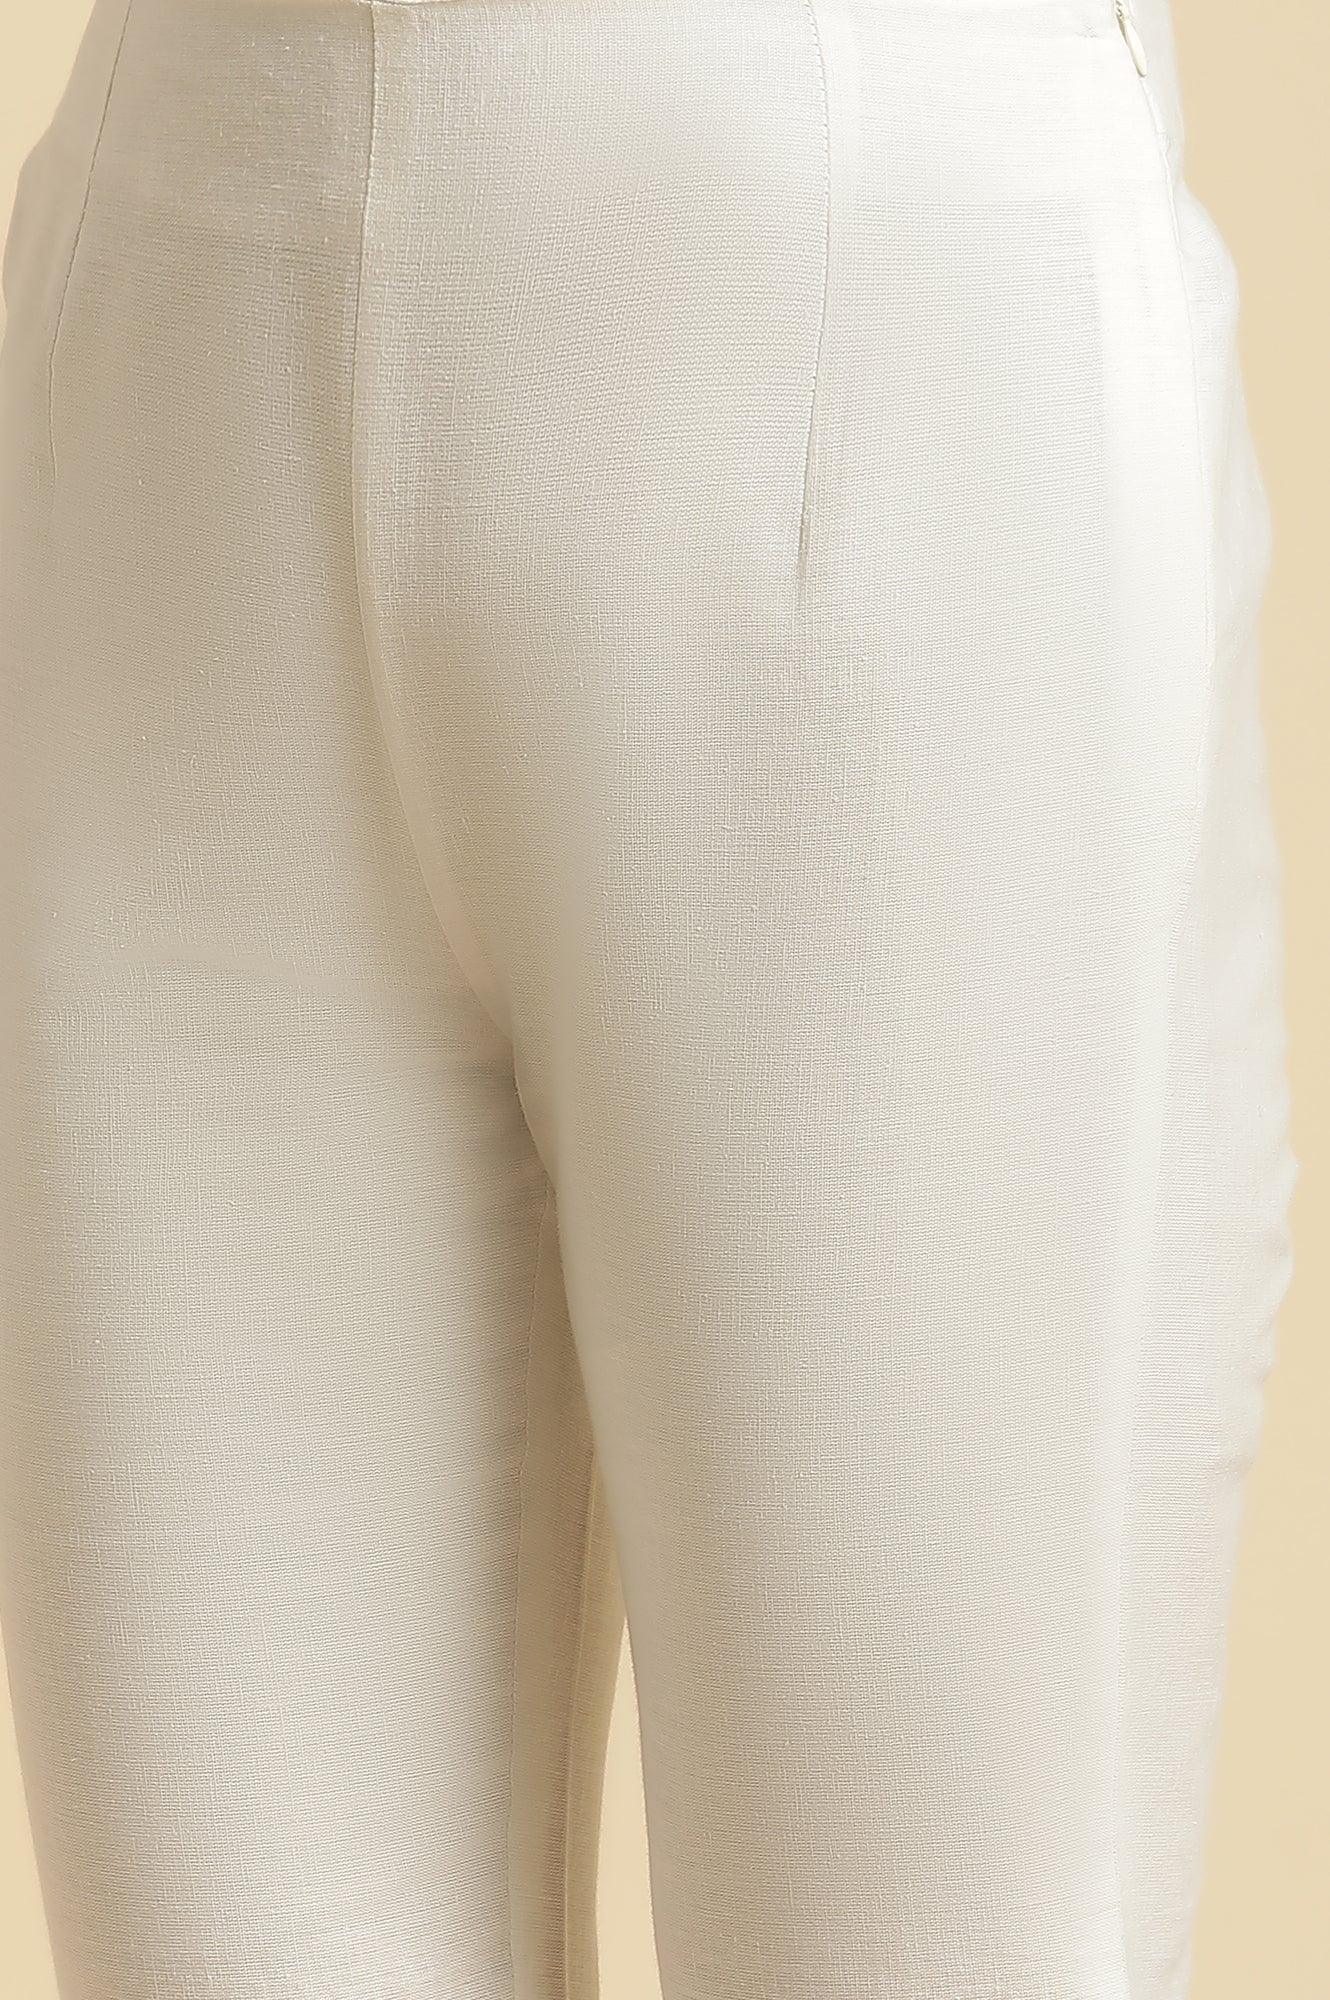 Off-White Cotton Flax Slim Pants With Lace At Hem - wforwoman